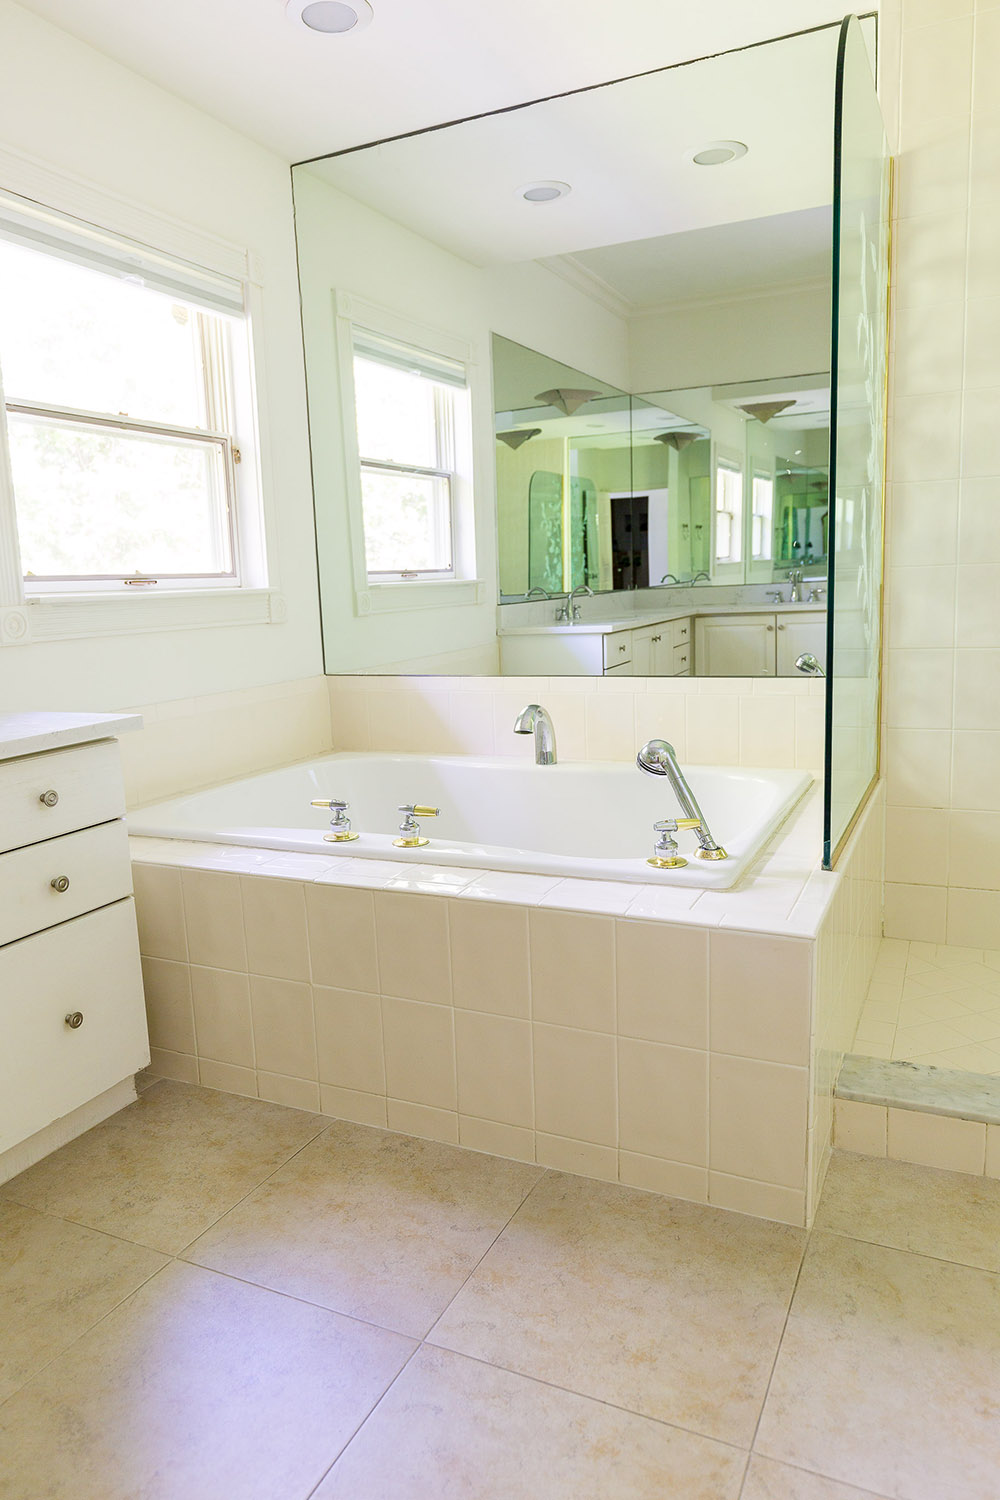 A bathroom with a mirrored wall before the makeover.